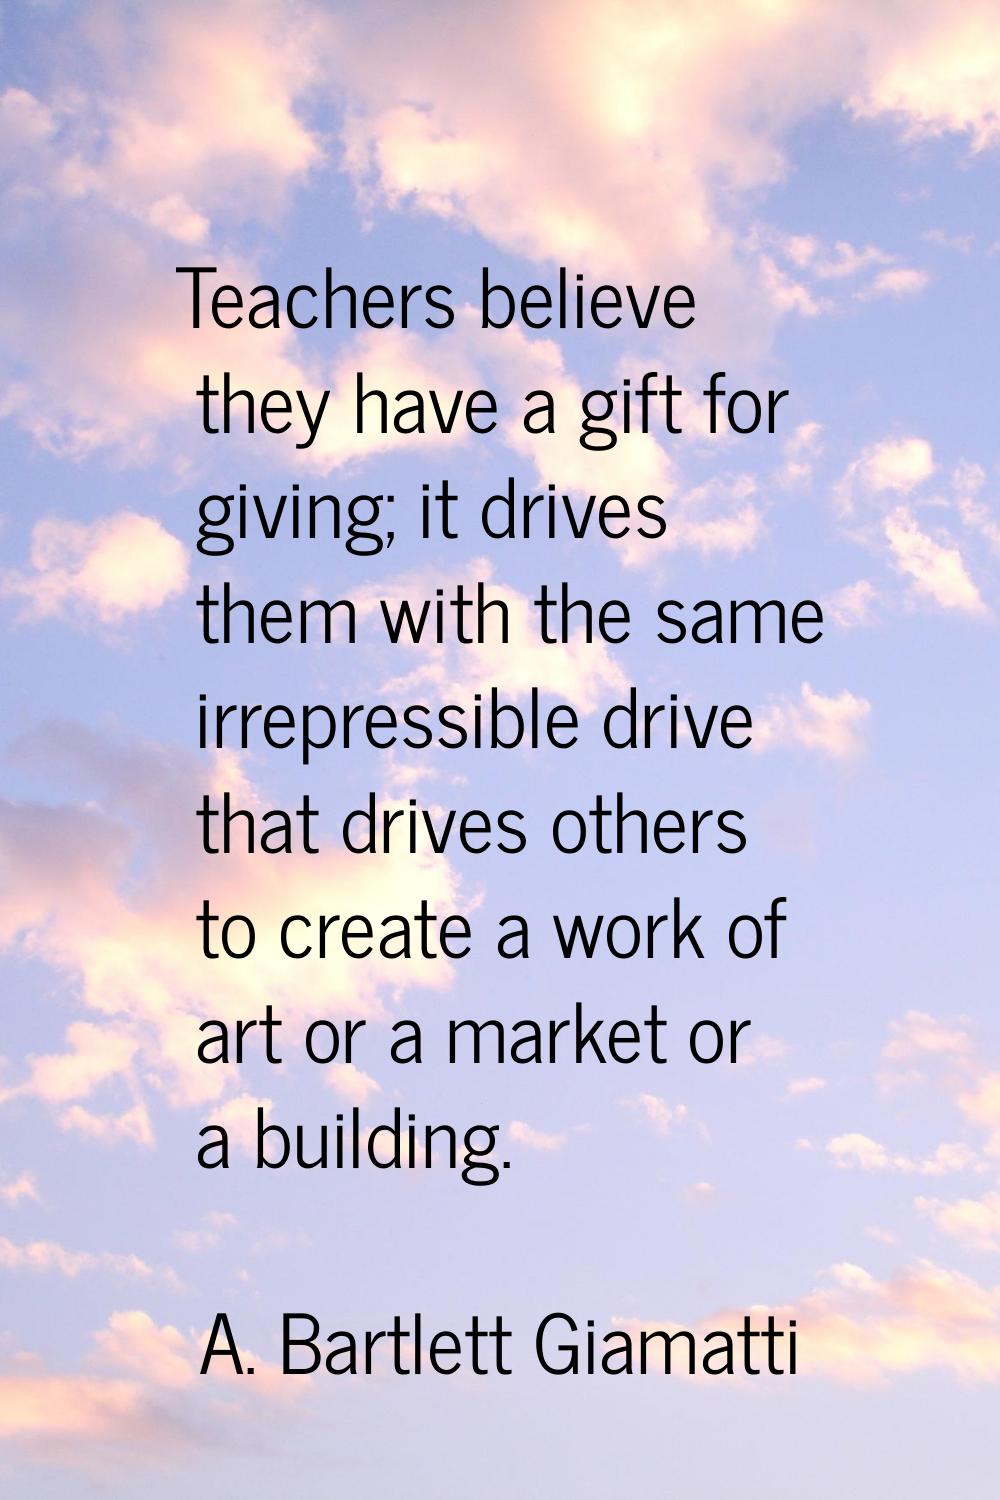 Teachers believe they have a gift for giving; it drives them with the same irrepressible drive that